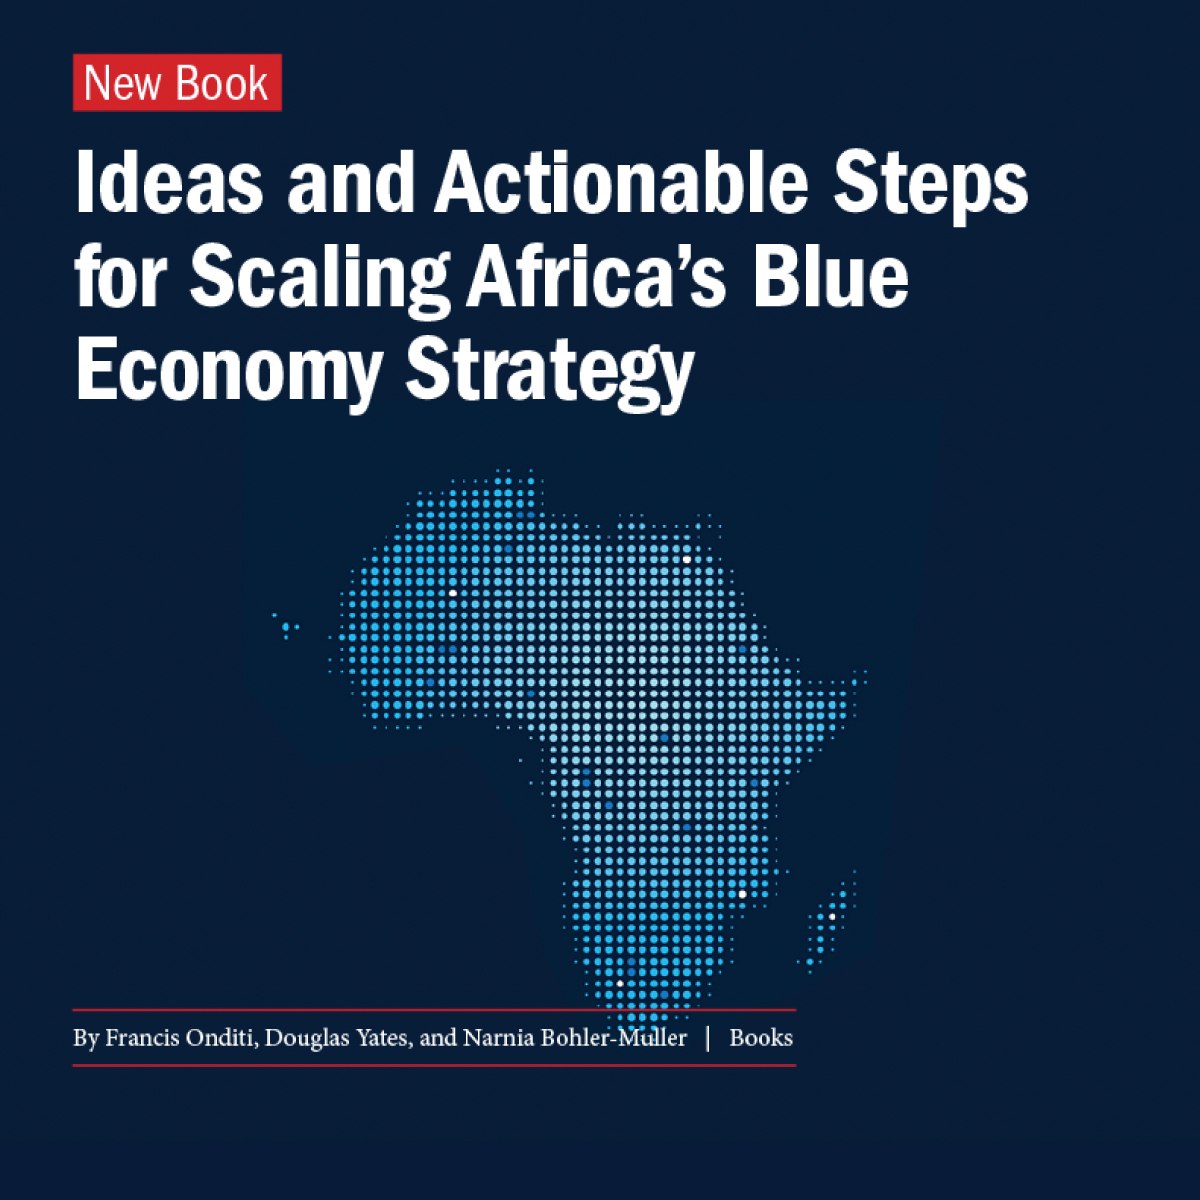 New Book: Ideas and Actionable Steps for Scaling Africa’s Blue Economy Strategy